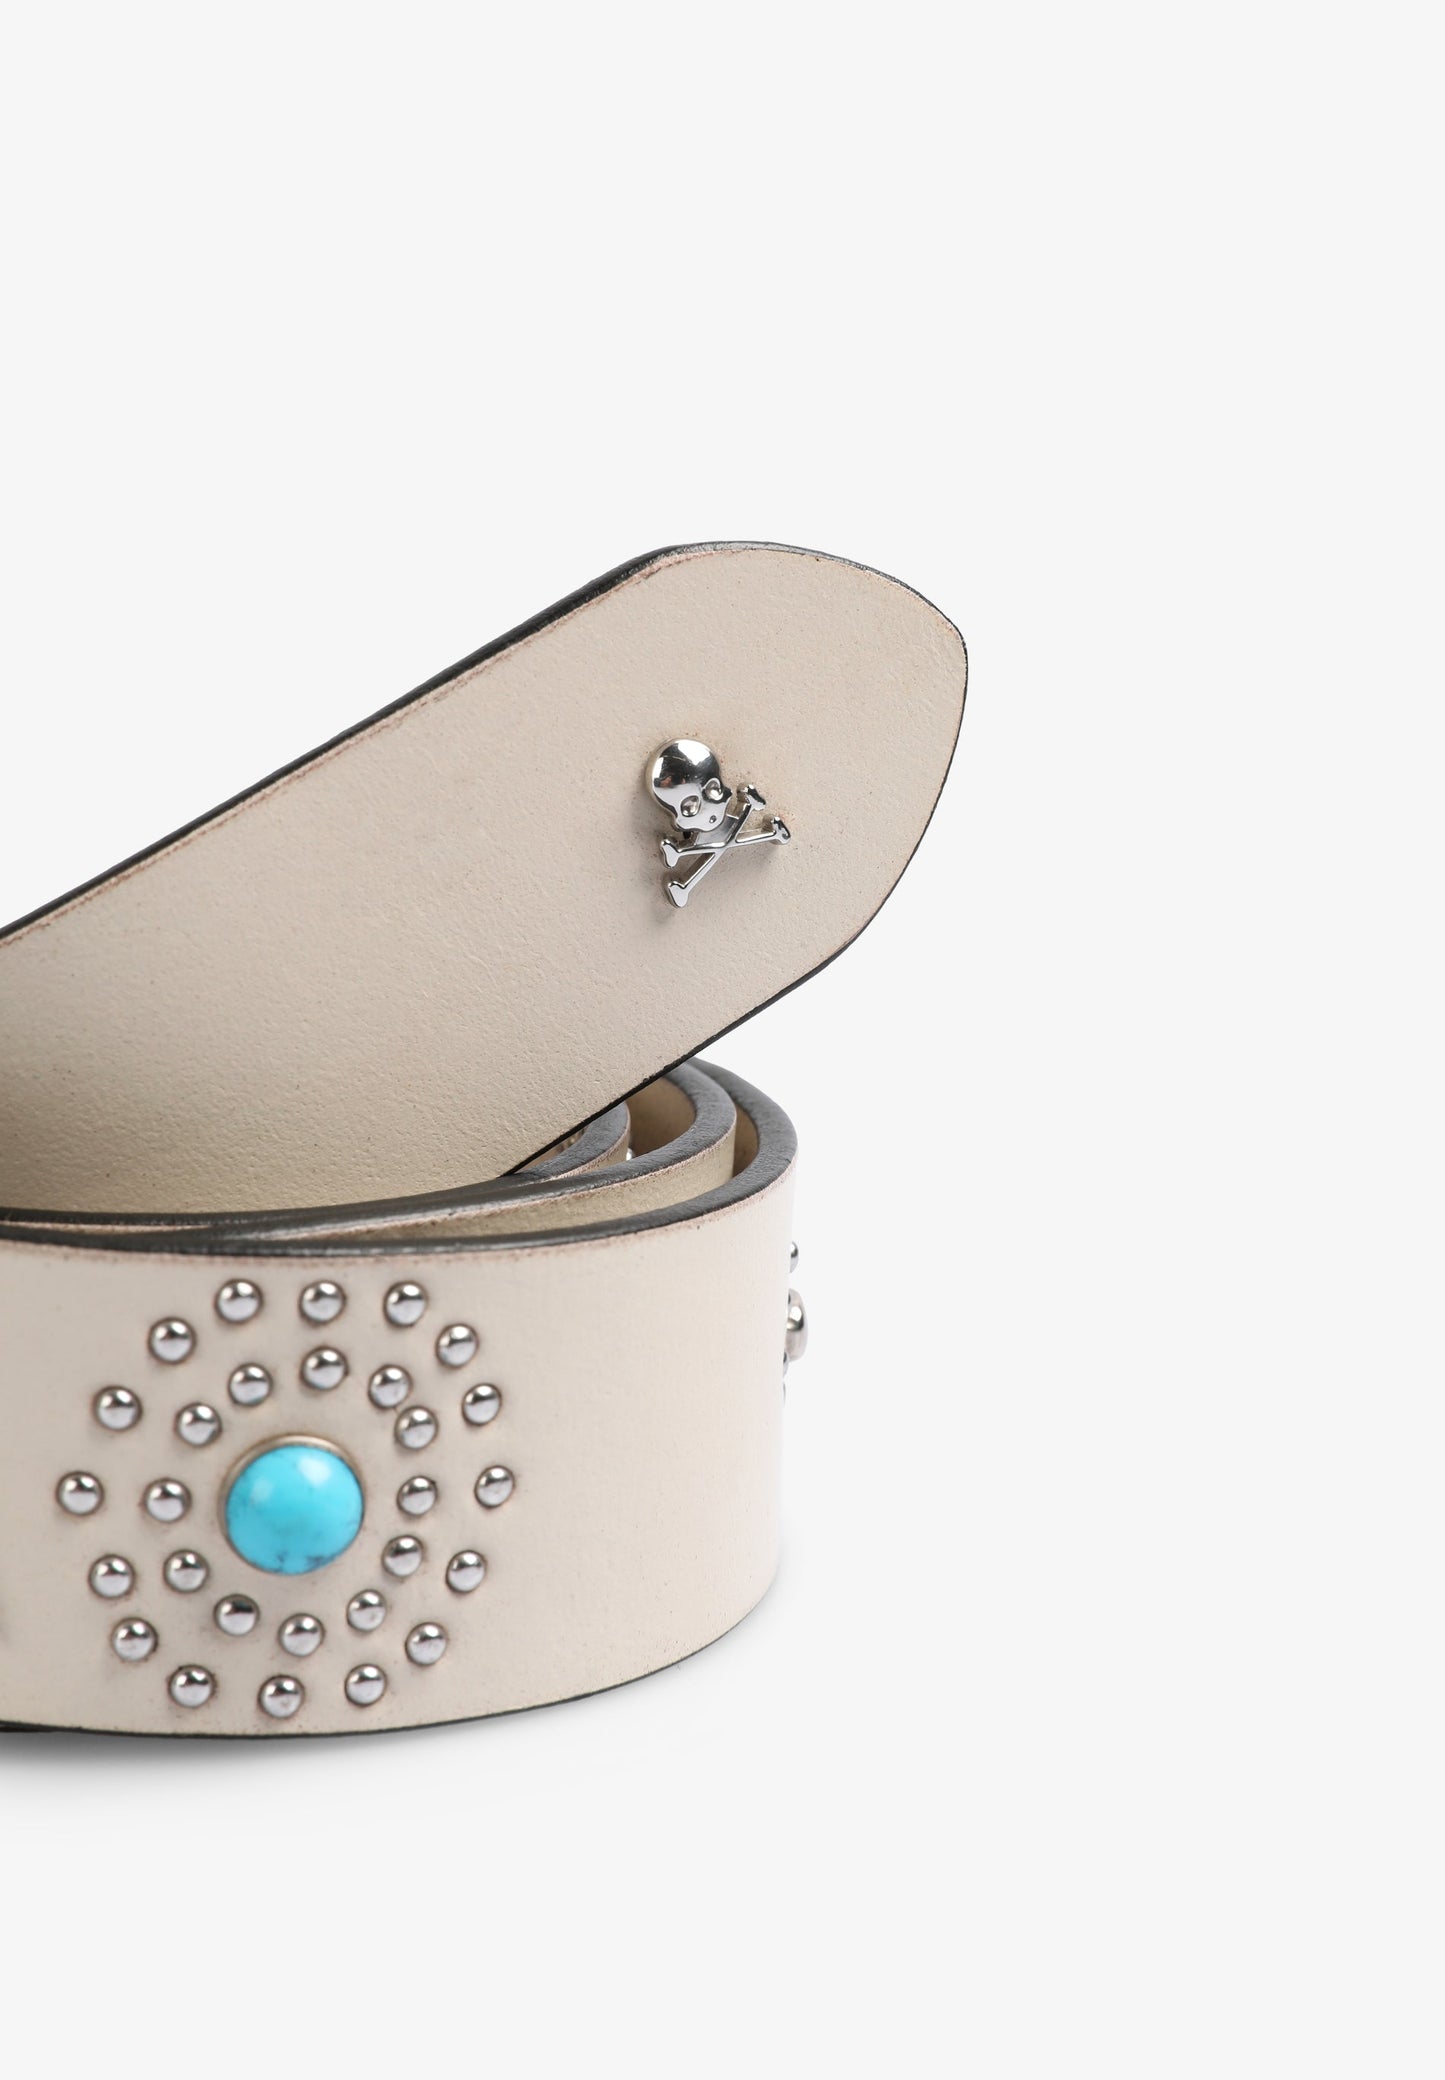 STUDDED LEATHER BELT WITH STONES DETAIL